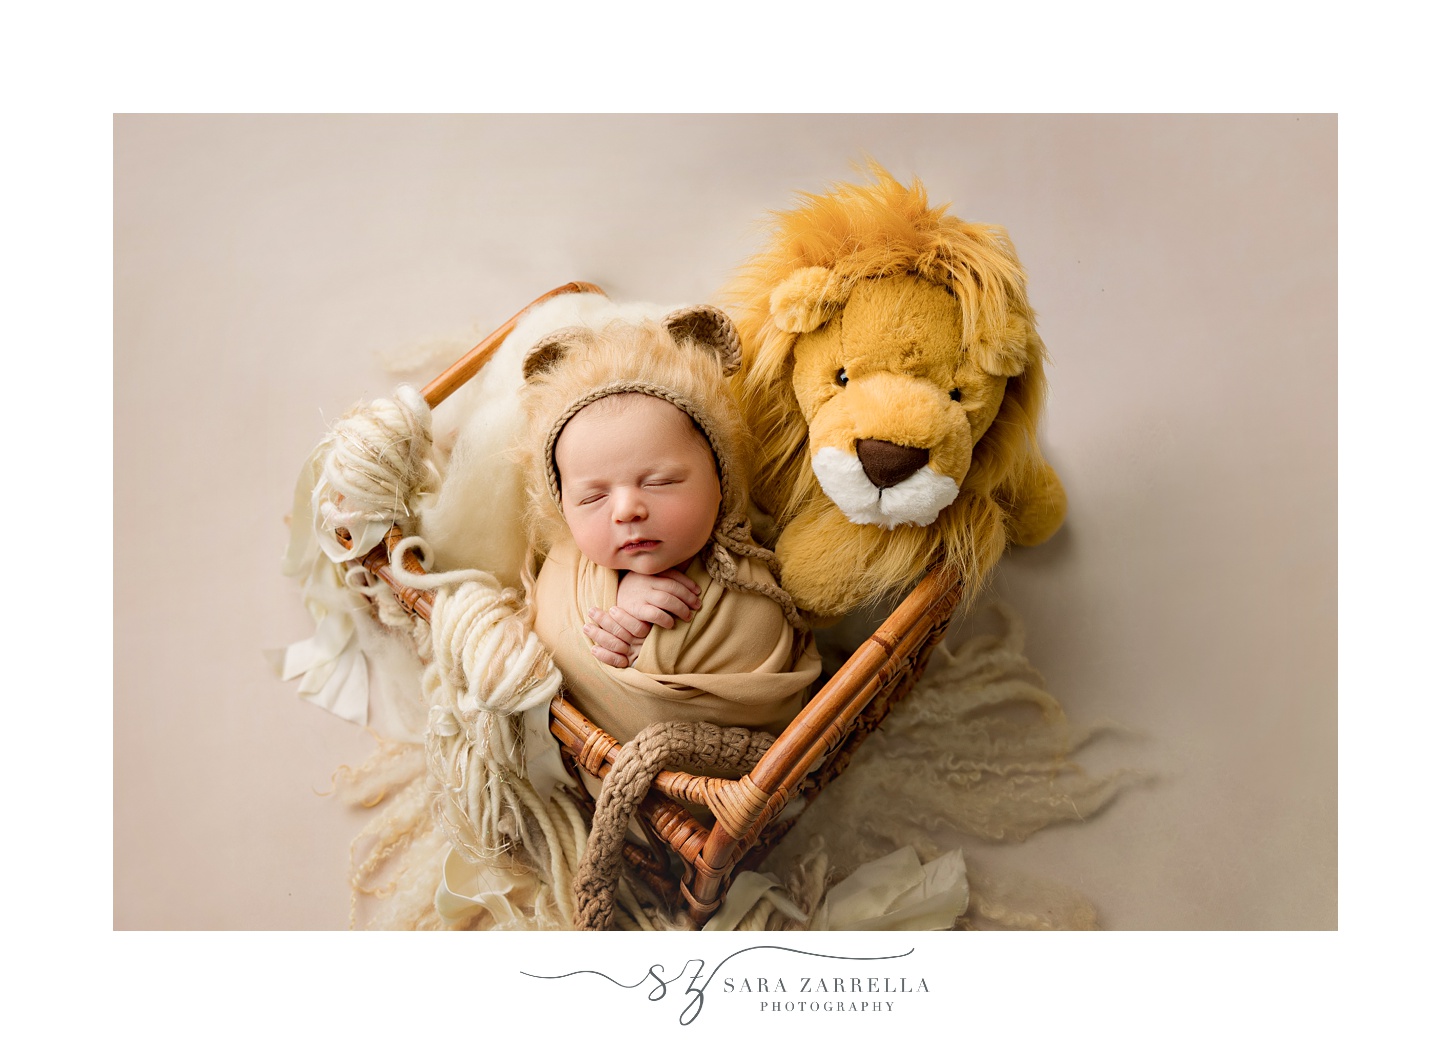 baby sleeps in wooden box with lion stuffed animal 